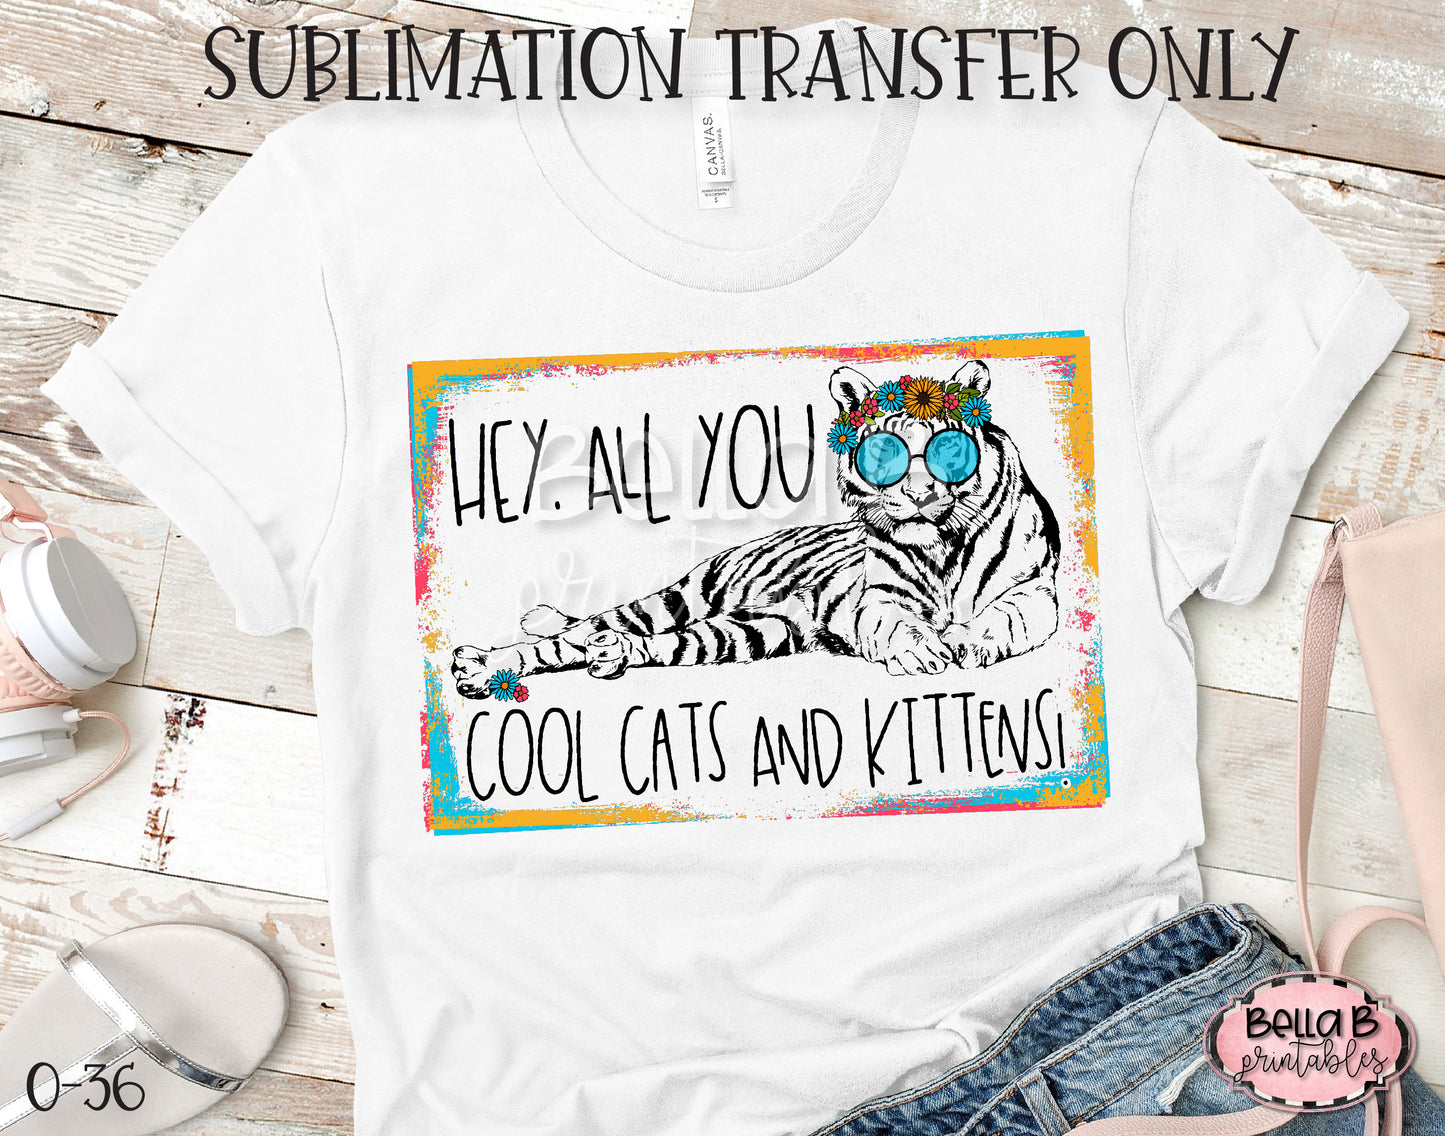 Hey All You Cool Cats And Kittens Sublimation Transfer, Ready To Press, Heat Press Transfer, Sublimation Print